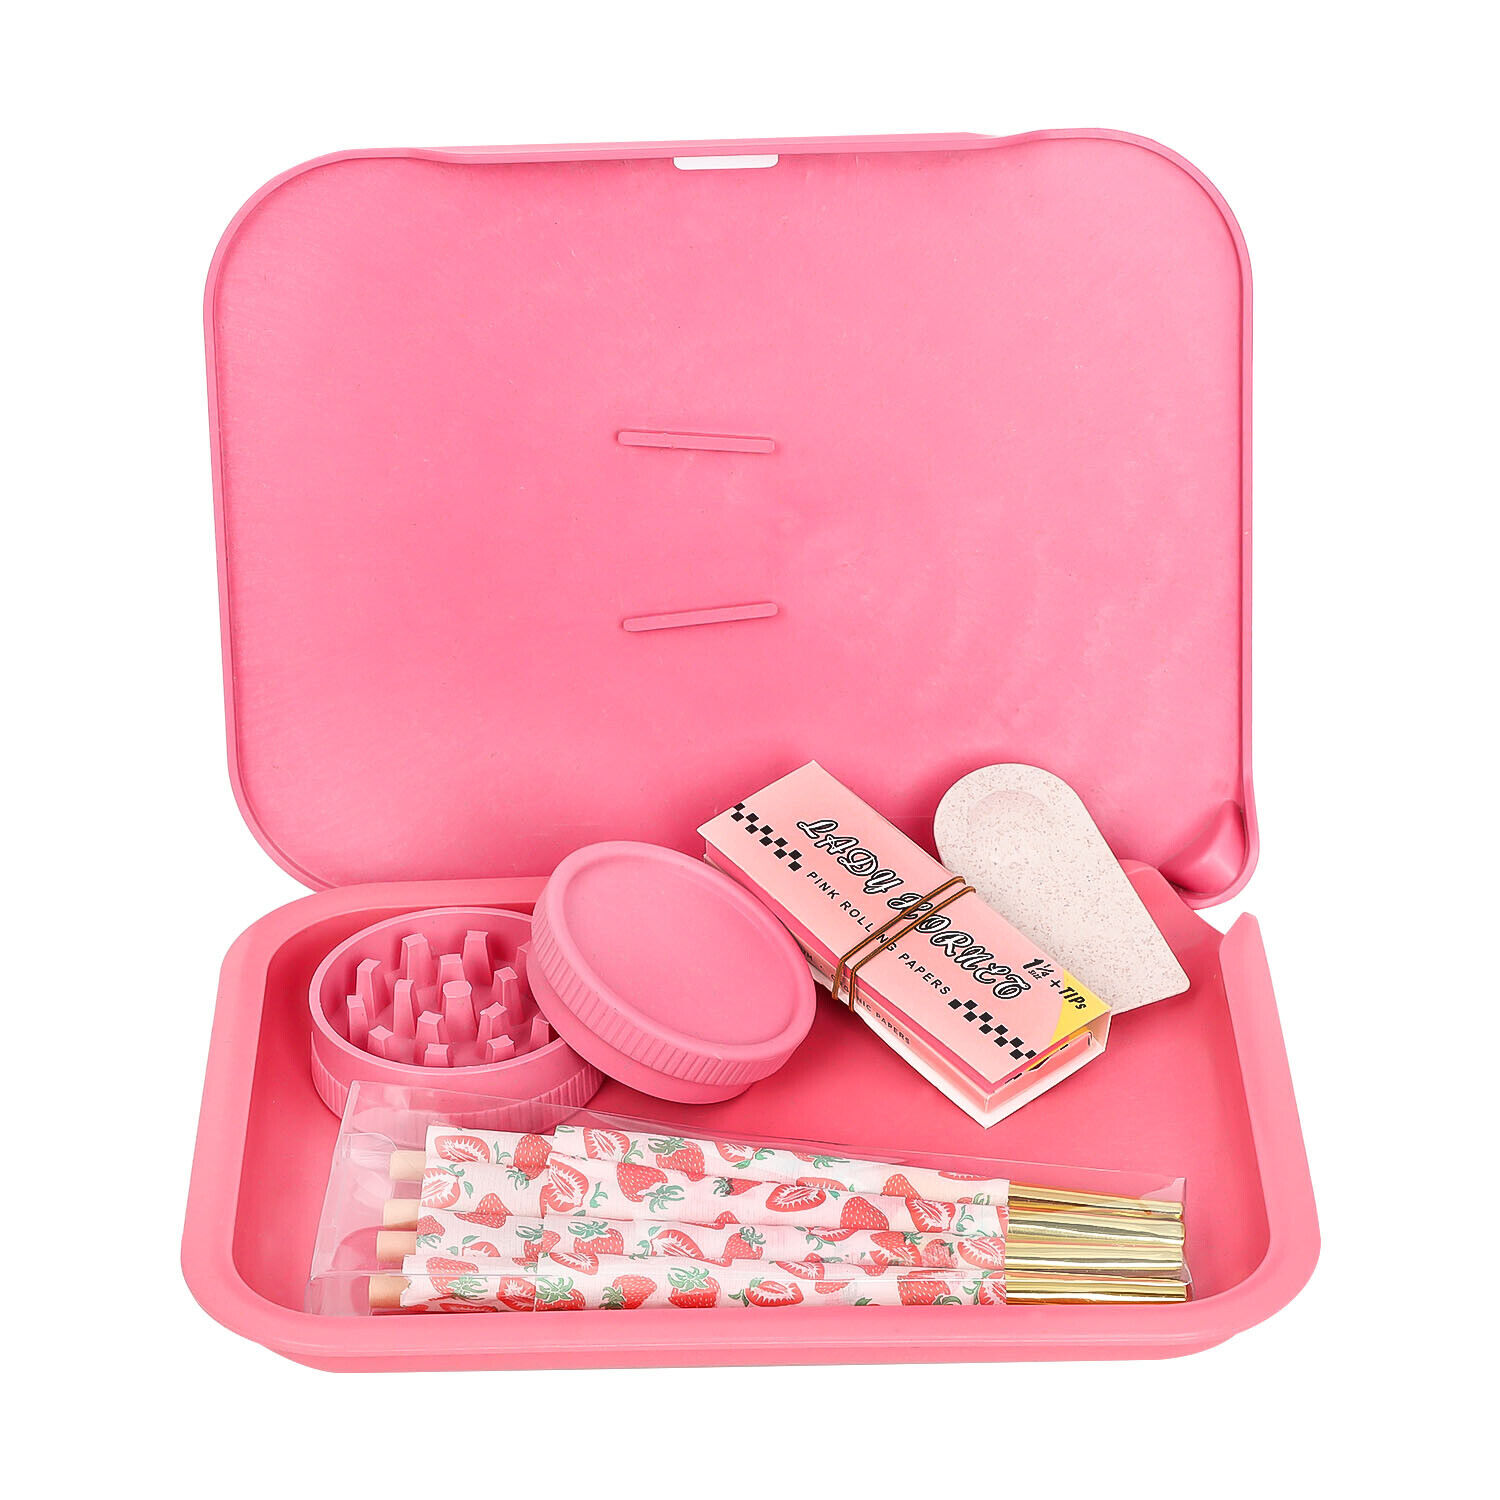 LADY HORNET PINK Smoking Set Rolling Tray Kit Spice Grinder Pre Rolled Cones